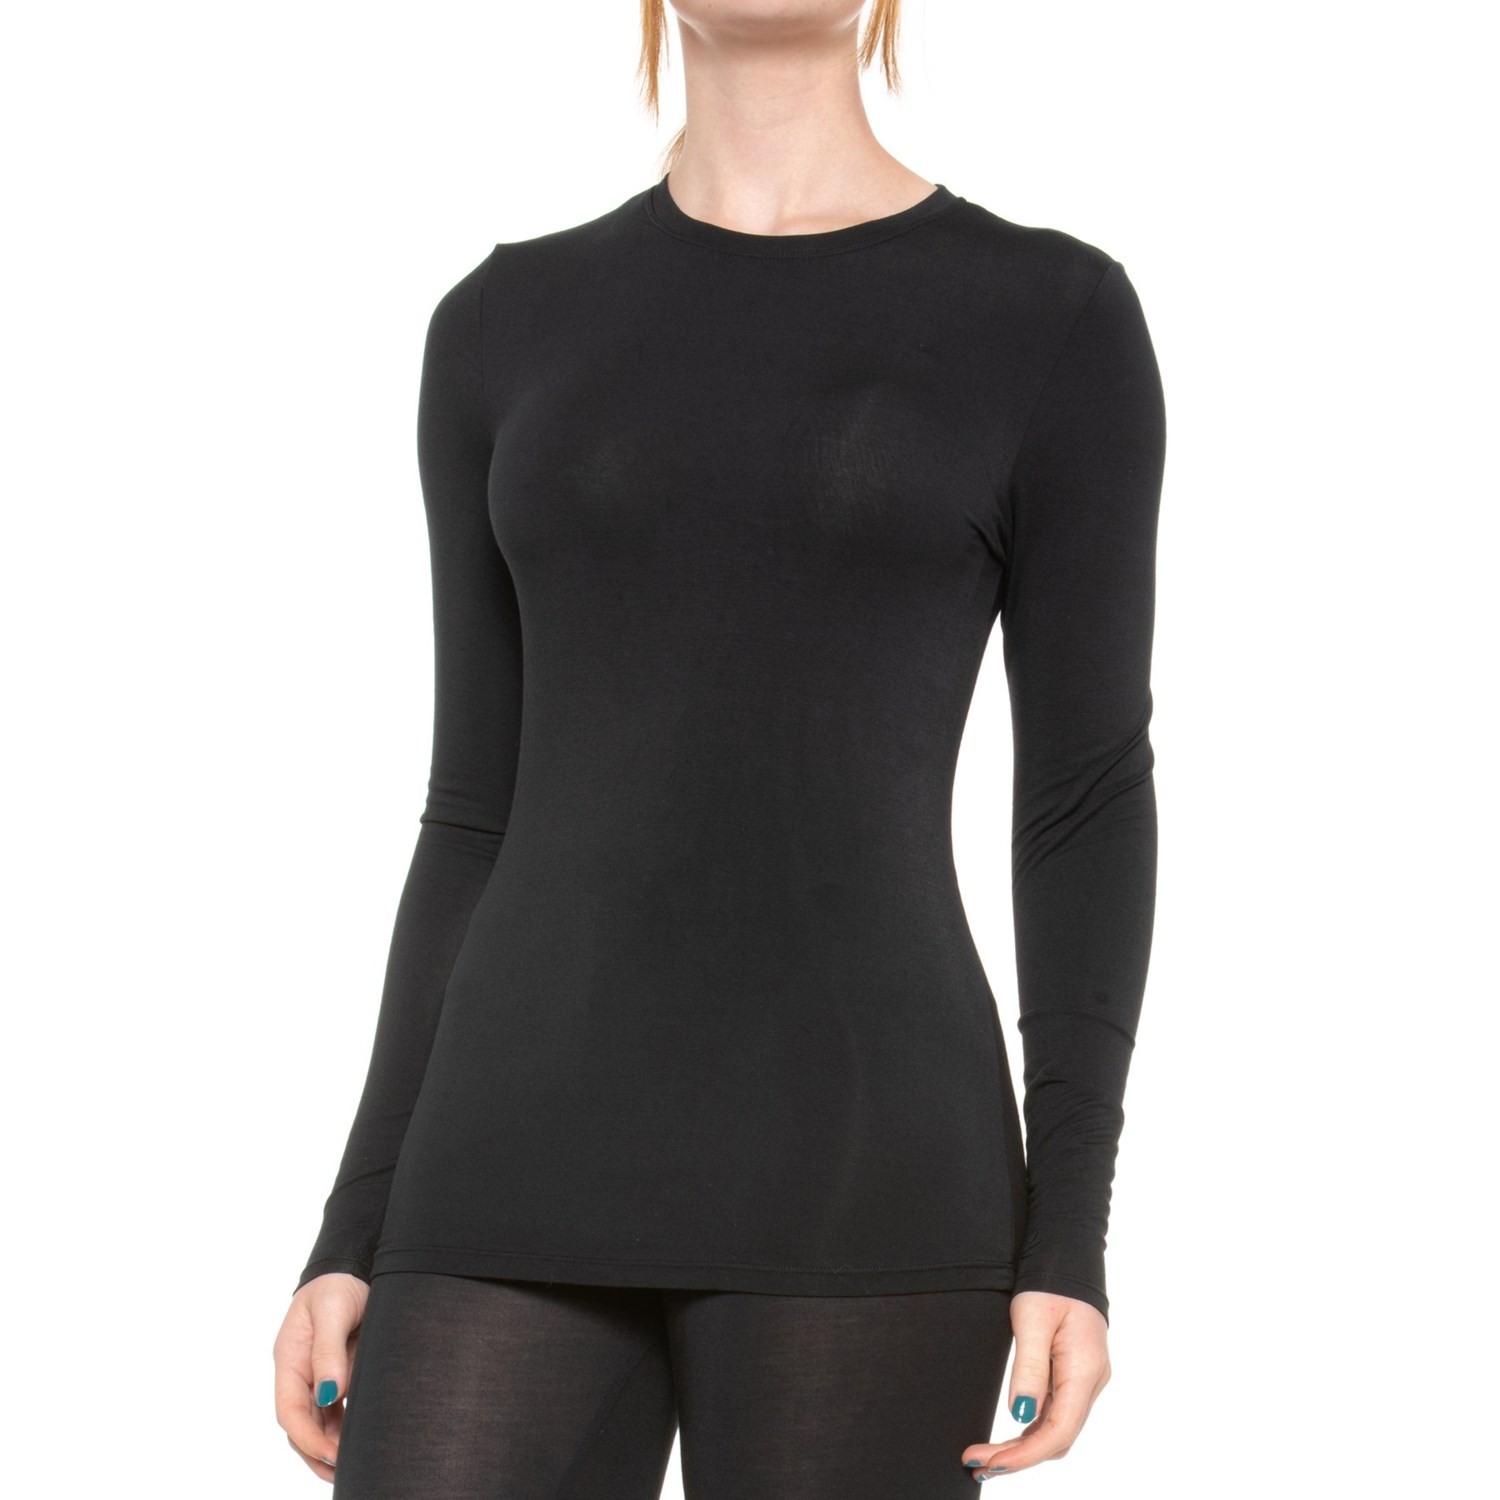 Cuddl Duds SoftWear Base Layer Top and Leggings Set (For Women)